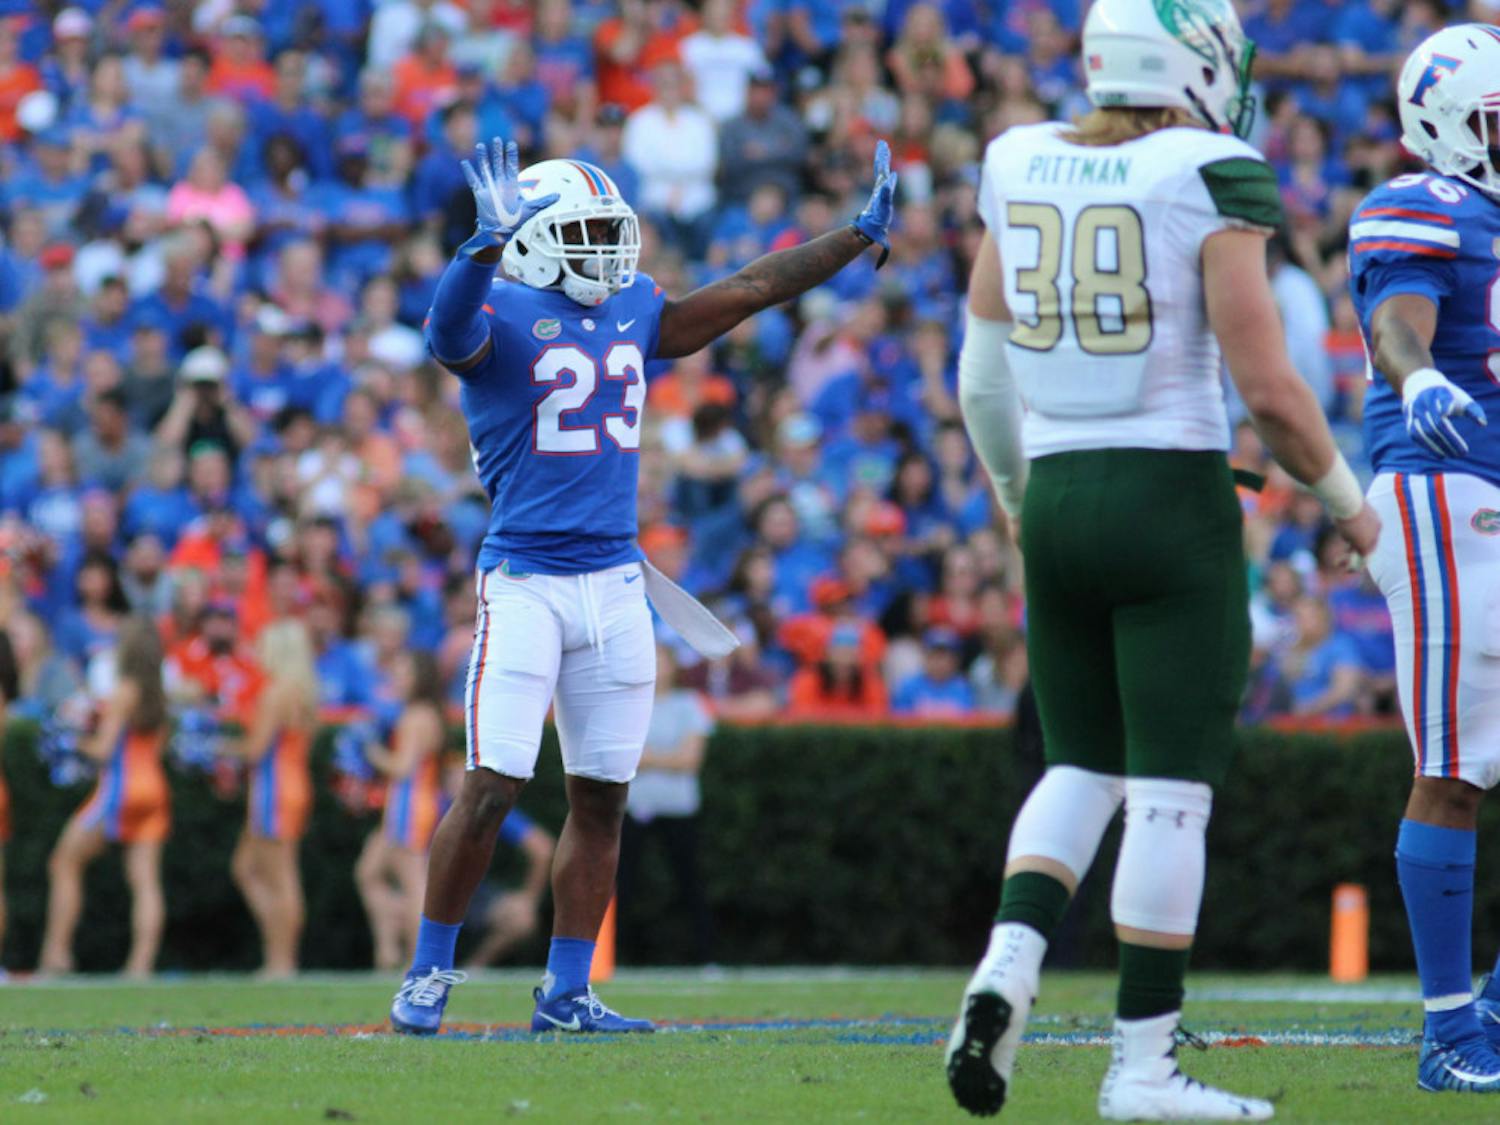 Chauncey Gardner Jr.'s 42-yard interception return set up Florida's first touchdown of the game on Saturday in its 36-7 win over UAB.